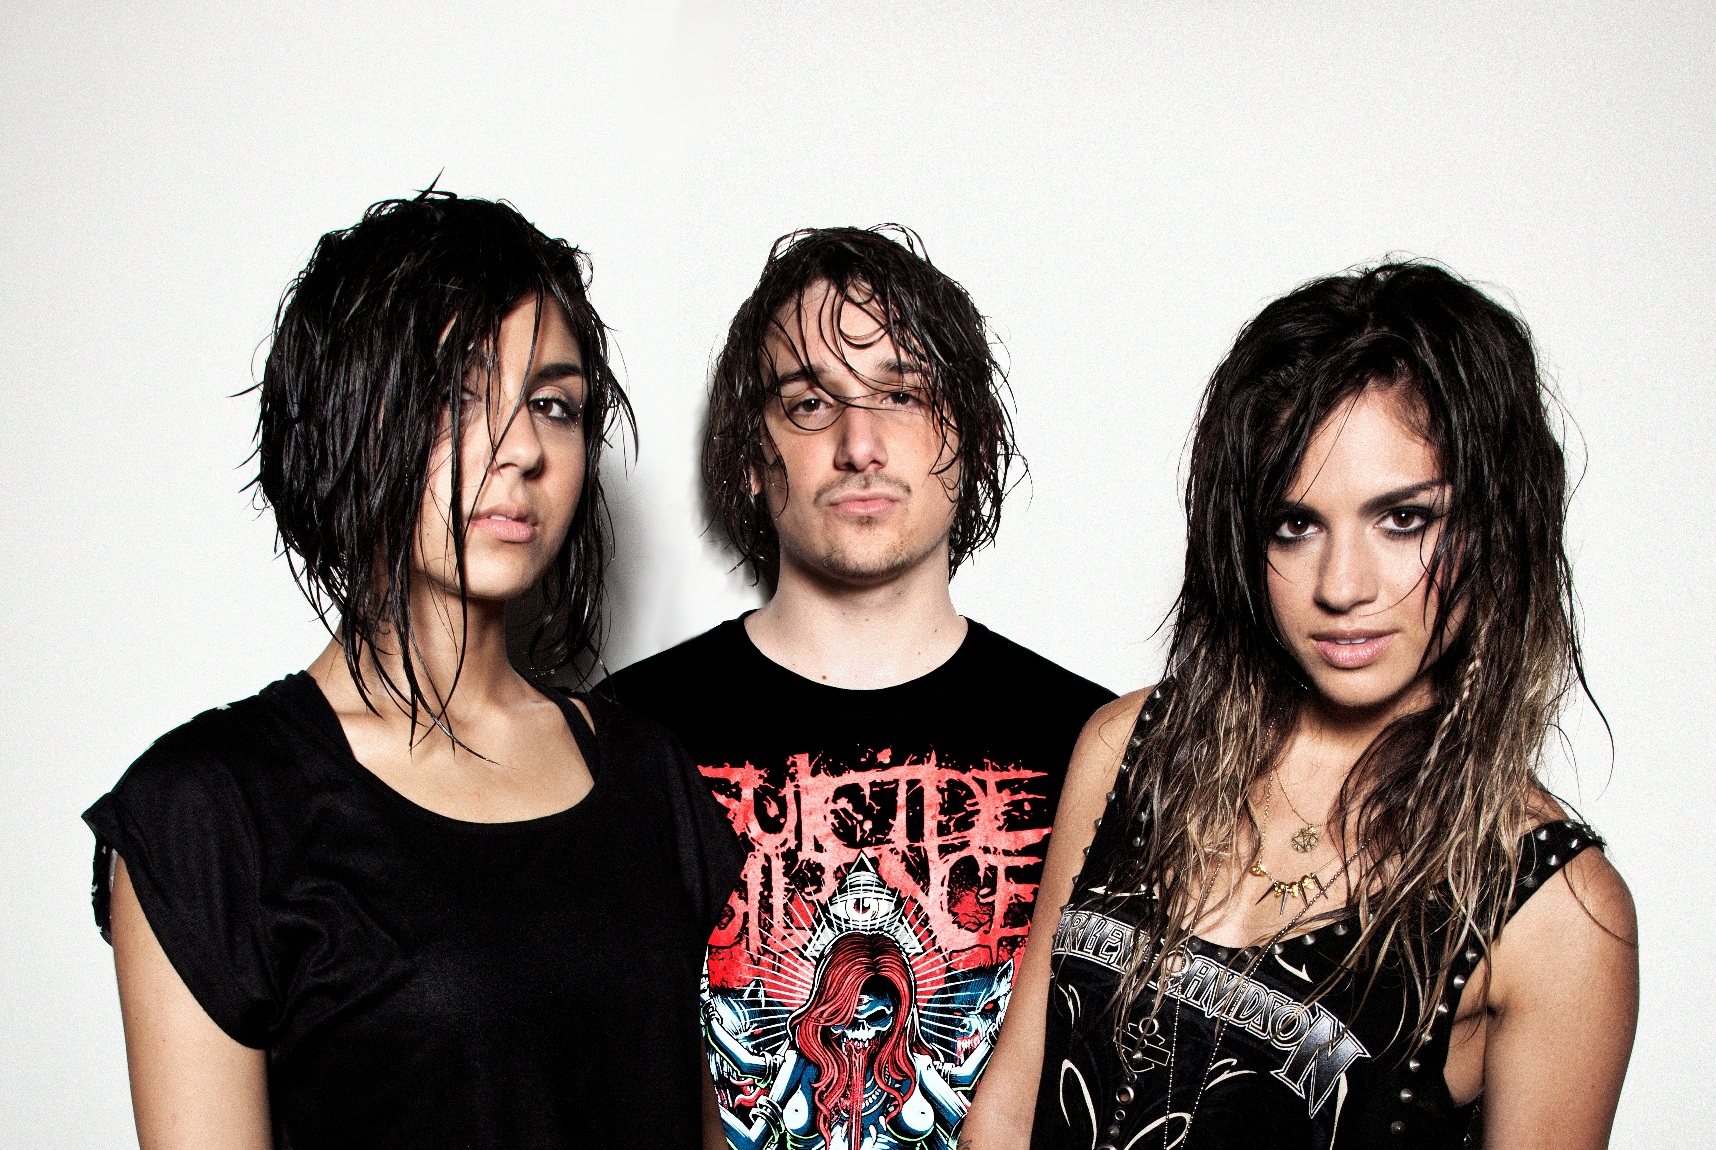 Musical Recording Artists Krewella to Visit Patients at Spaulding Rehabilitation Hospital in Boston This Wednesday, October 30